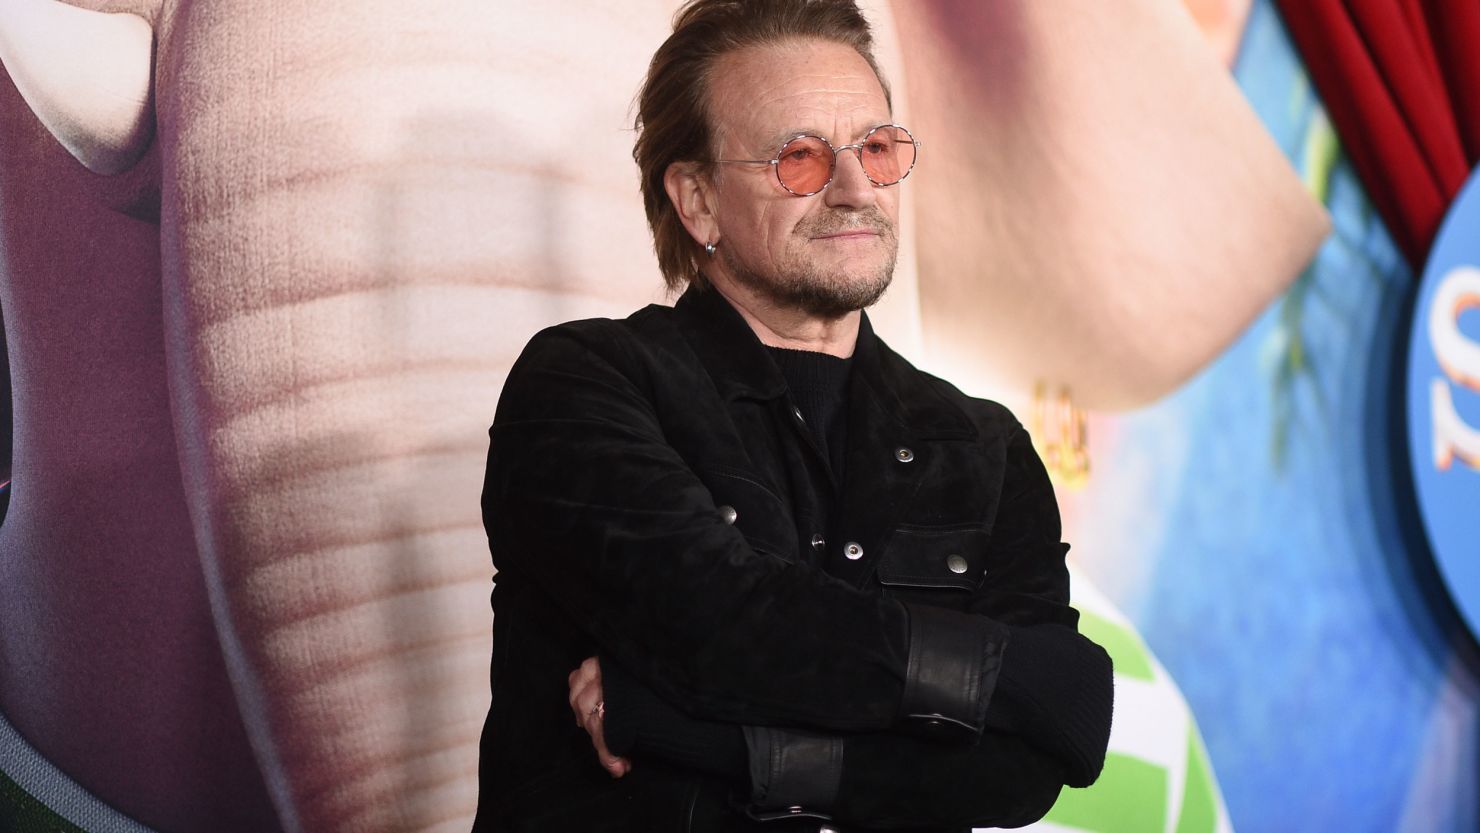 Bono arrives at the premiere of "Sing 2" in December, 2021